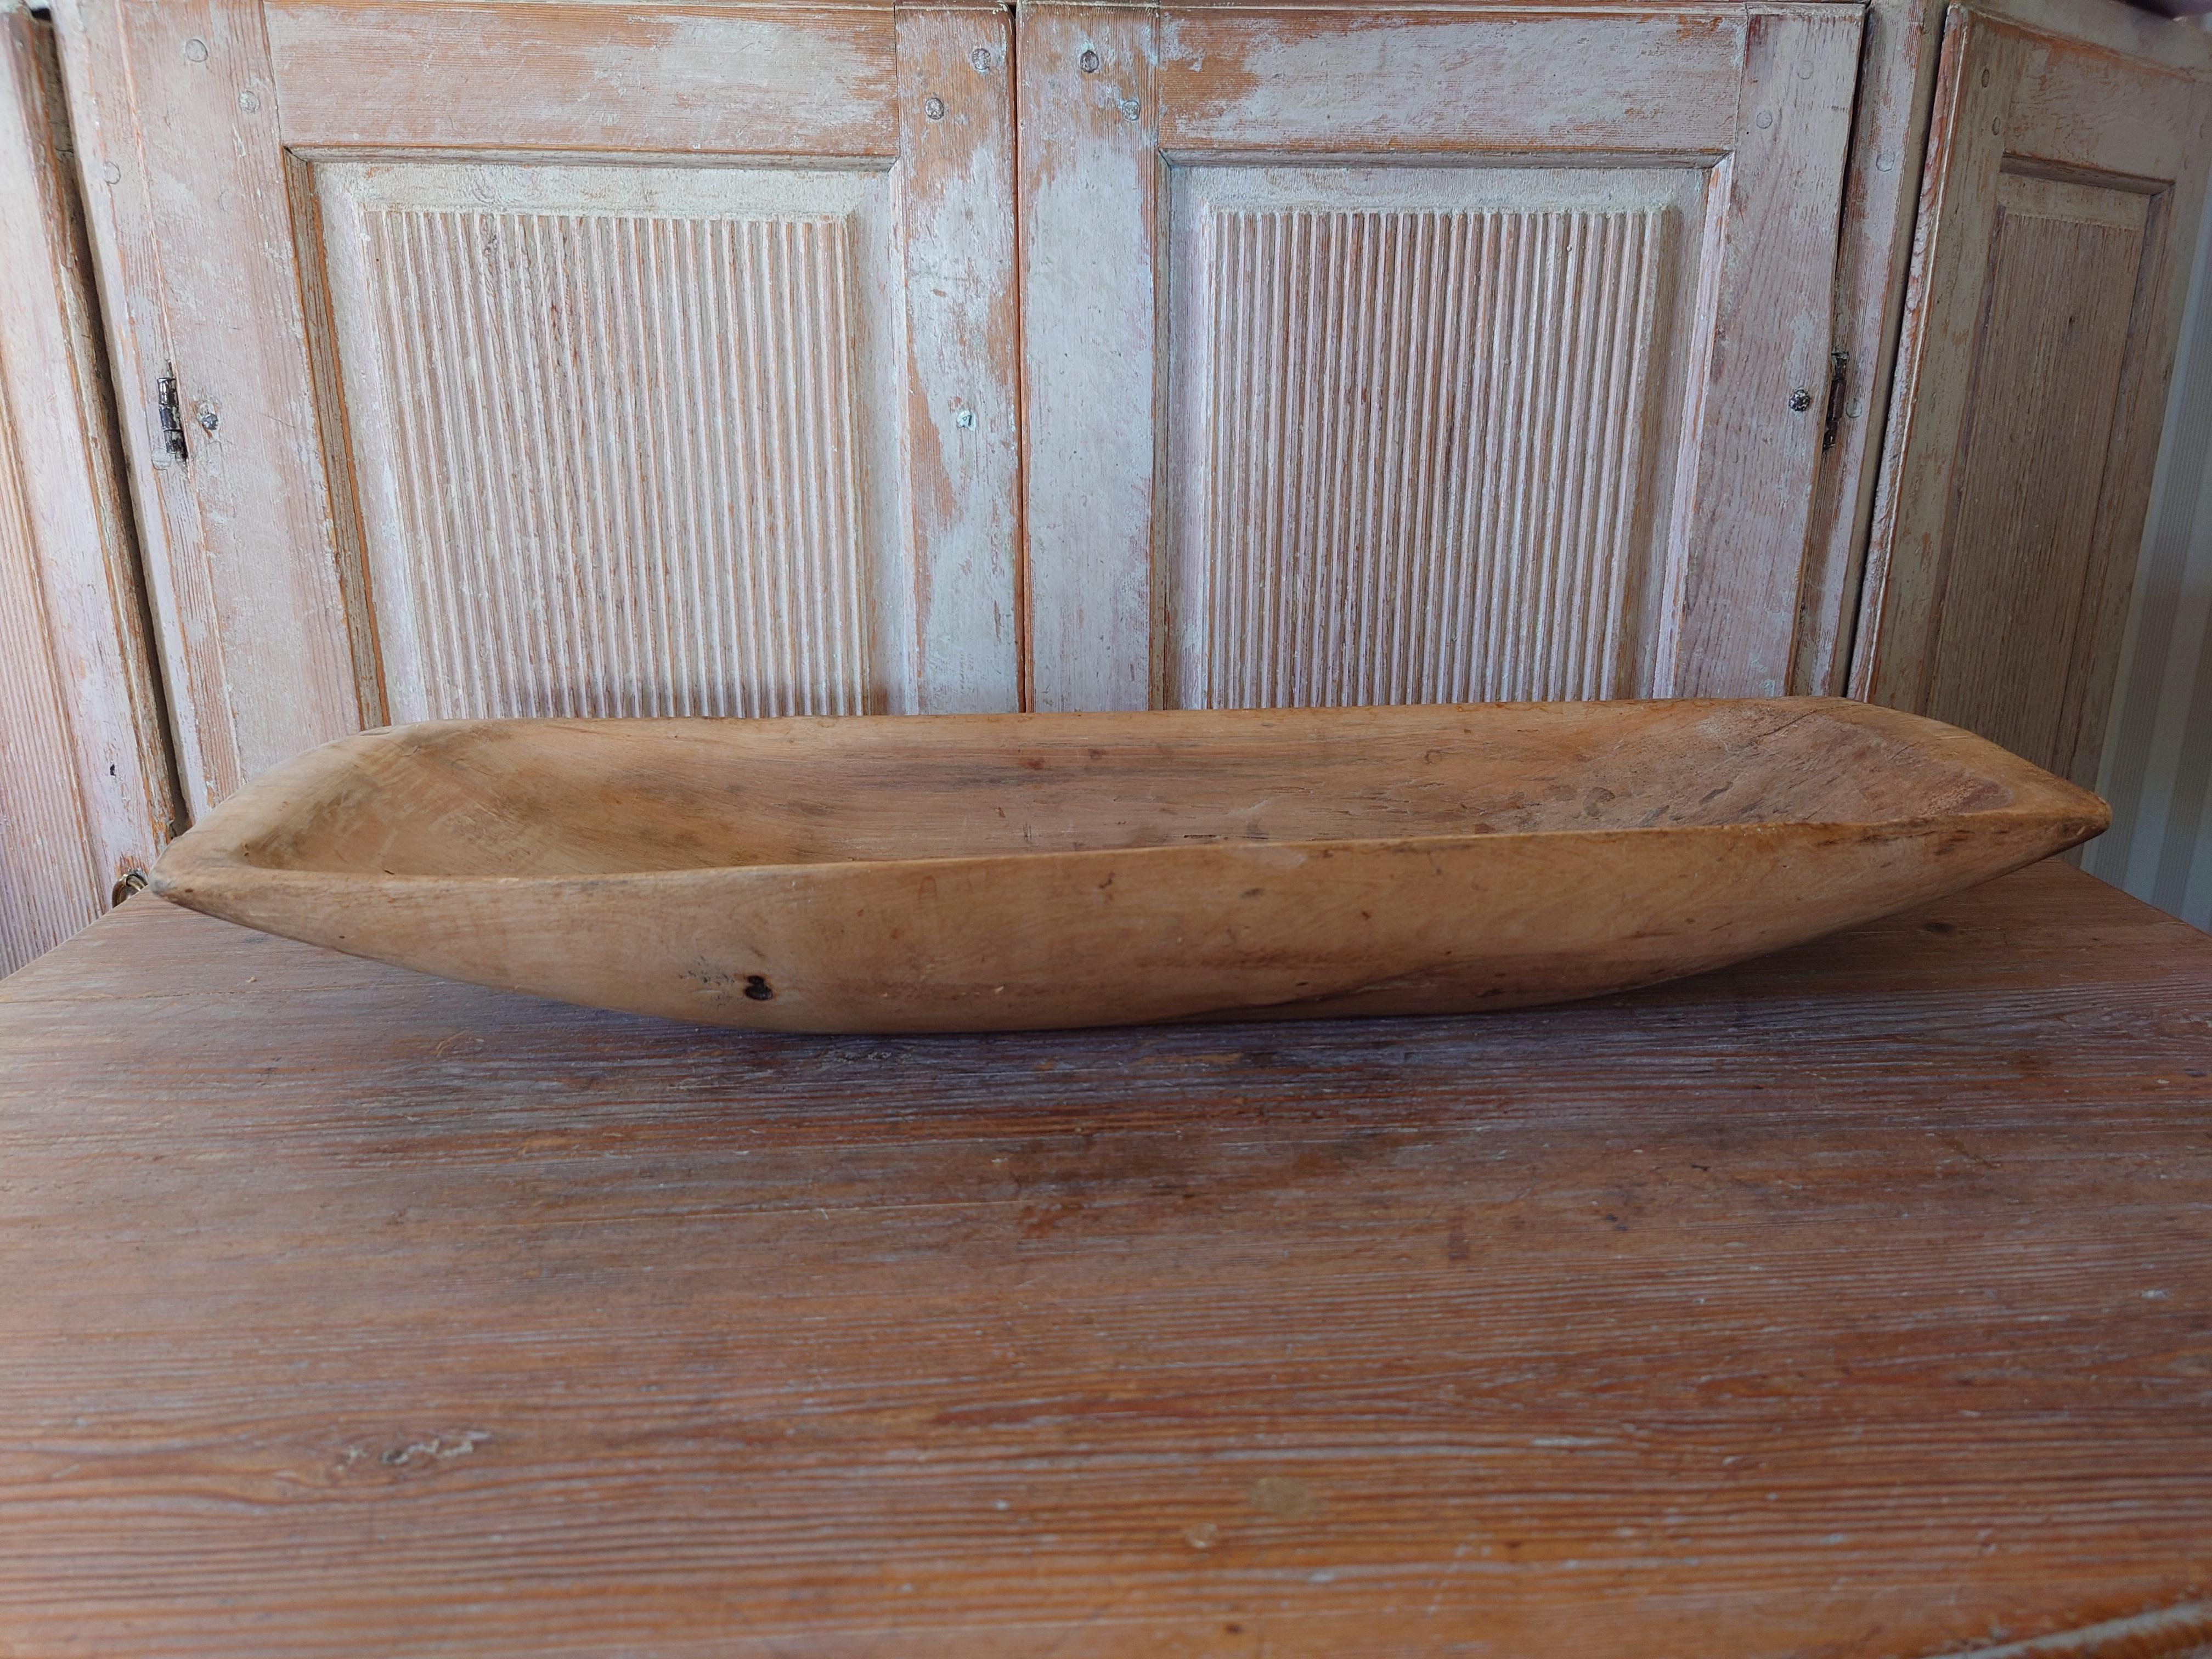 A genuine antique wood trough dated 1789 and signed with ownermarks PPS OIS ,from Hälsingland Northern Sweden


A nearly monumentaly large farmers handcrafted form or trough/ serving bowl or centerpiece. In solid pine wood. A highly functional